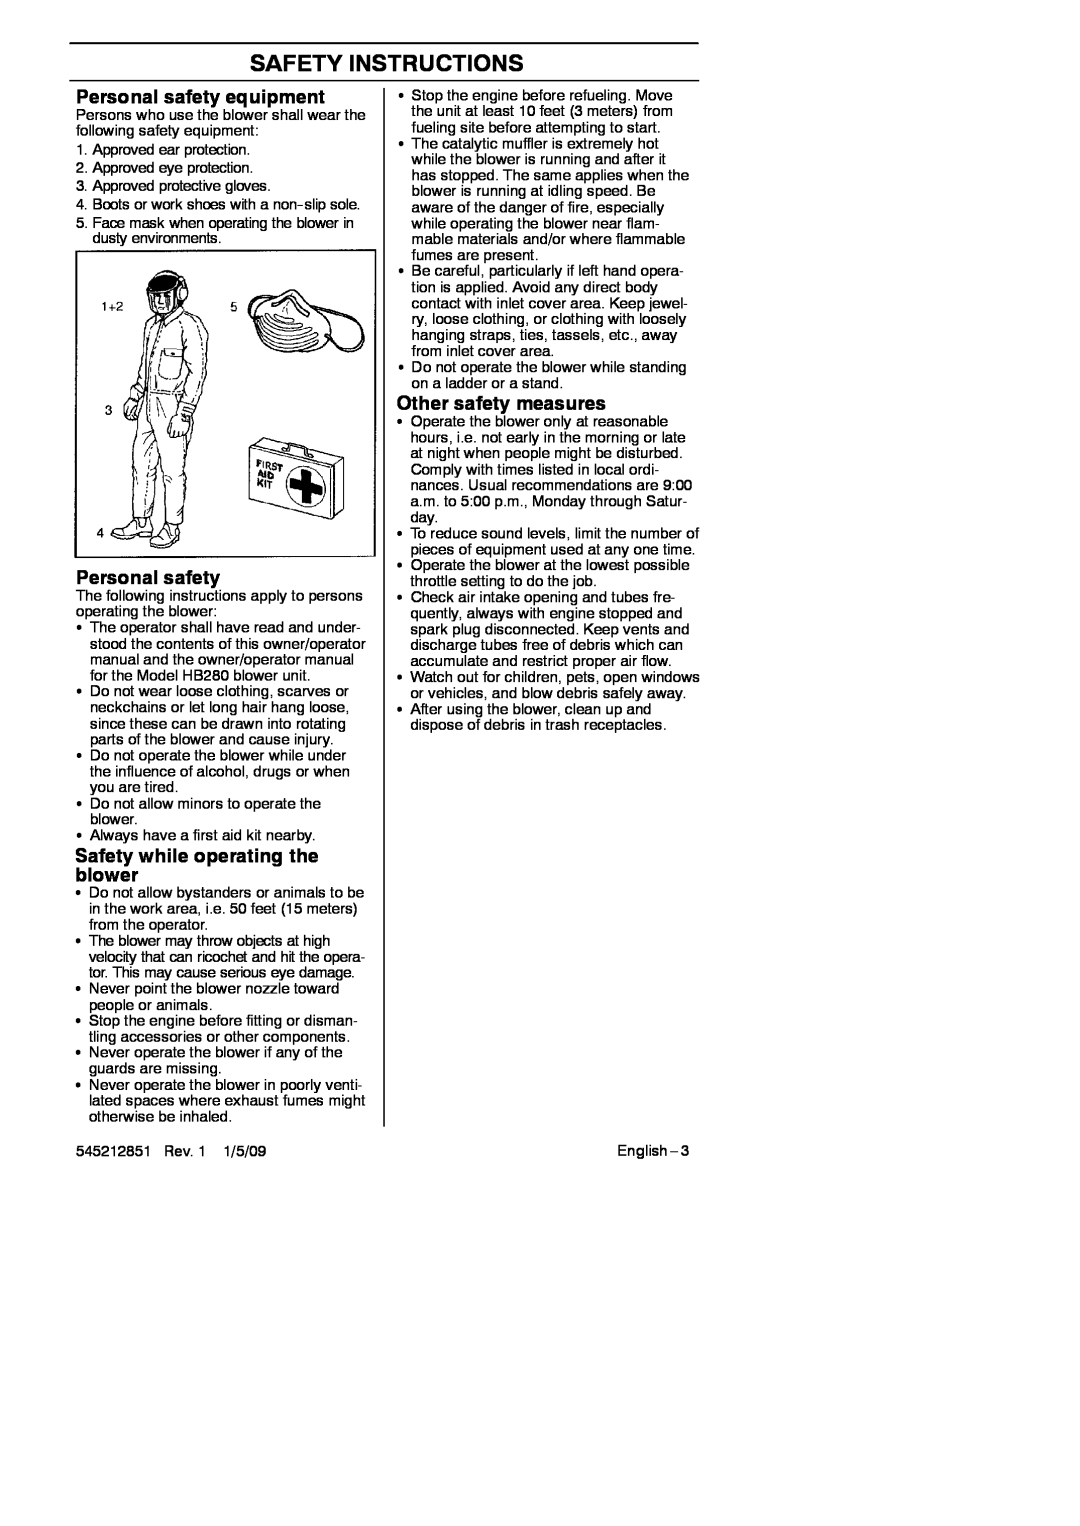 RedMax GK-280 Safety Instructions, Personal safety equipment, Safety while operating the blower, Other safety measures 